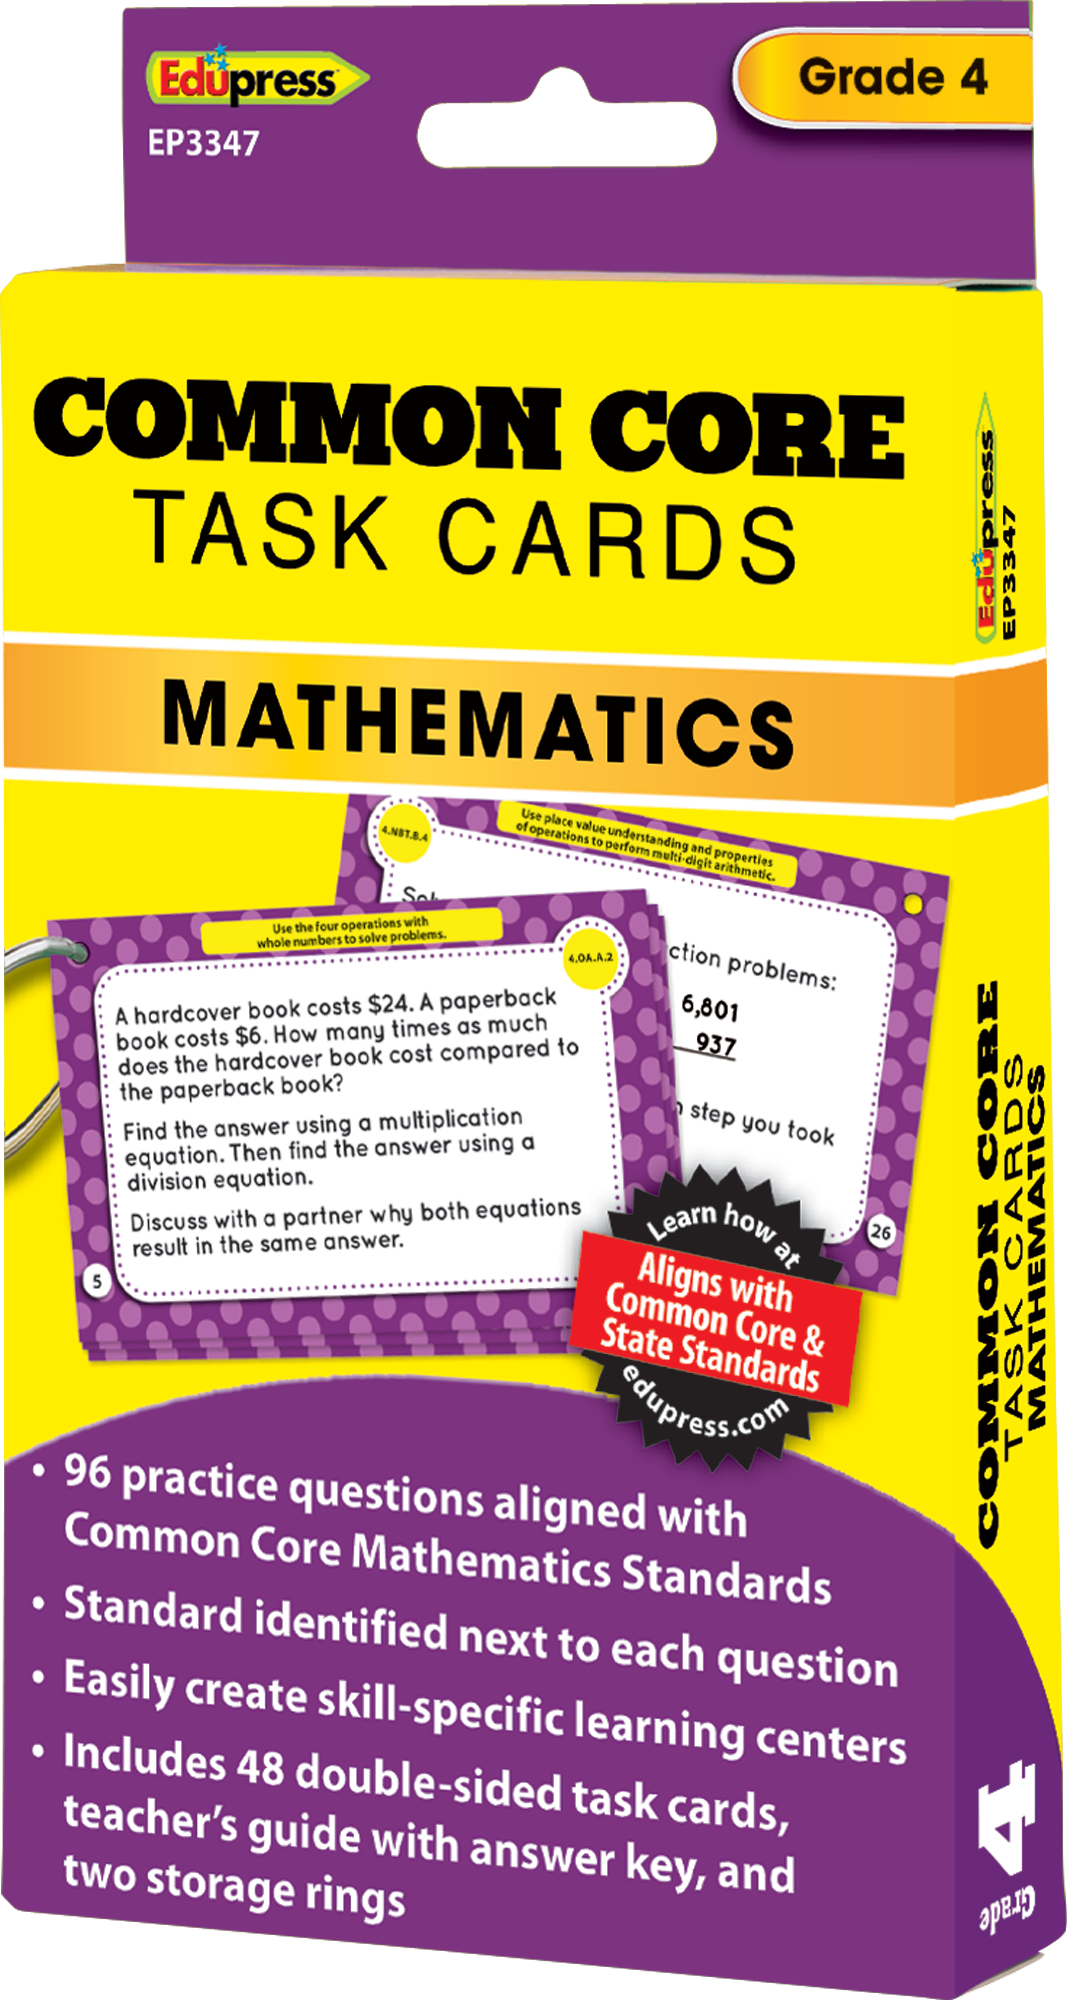 7th-grade-math-word-problems-worksheets-db-excelcom-7th-grade-percentage-word-problems